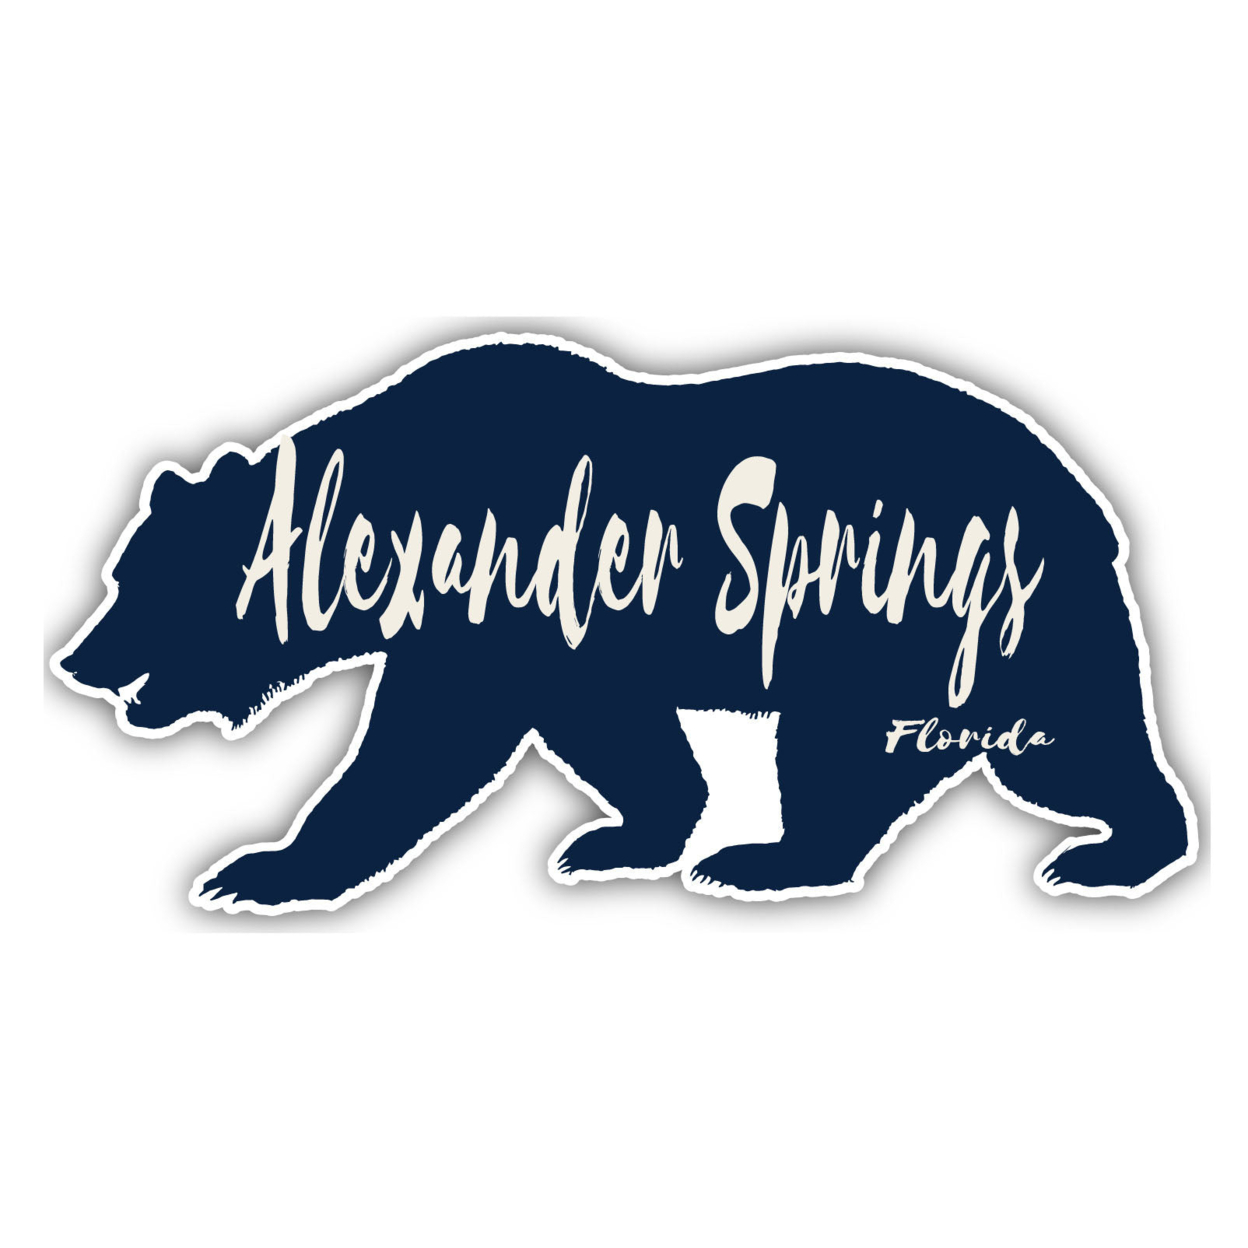 Alexander Springs Florida Souvenir Decorative Stickers (Choose Theme And Size) - 4-Pack, 12-Inch, Tent